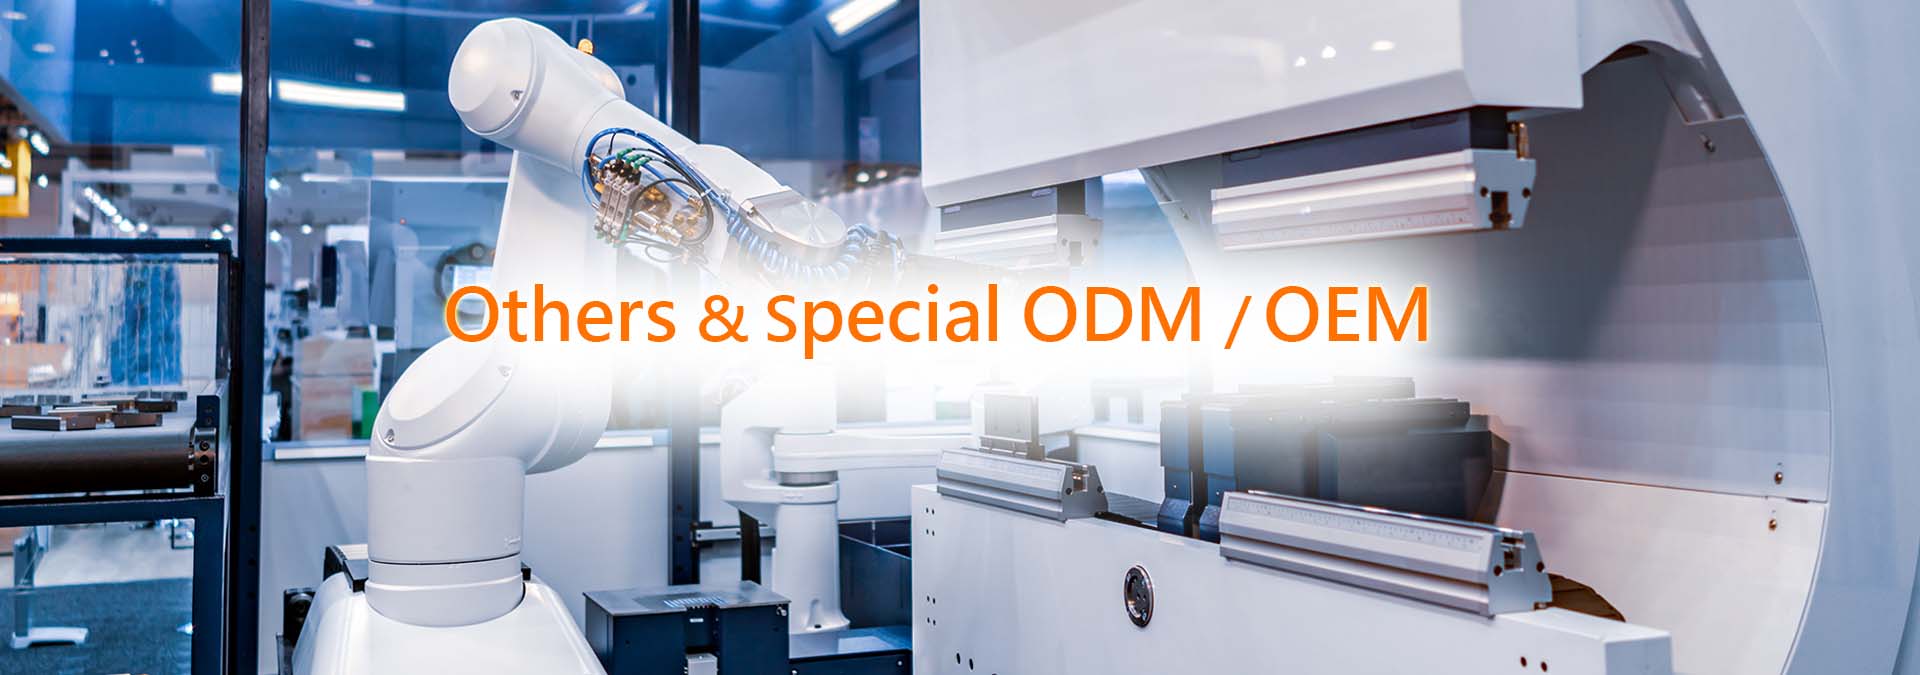 Other (& Special ODM / OEM)